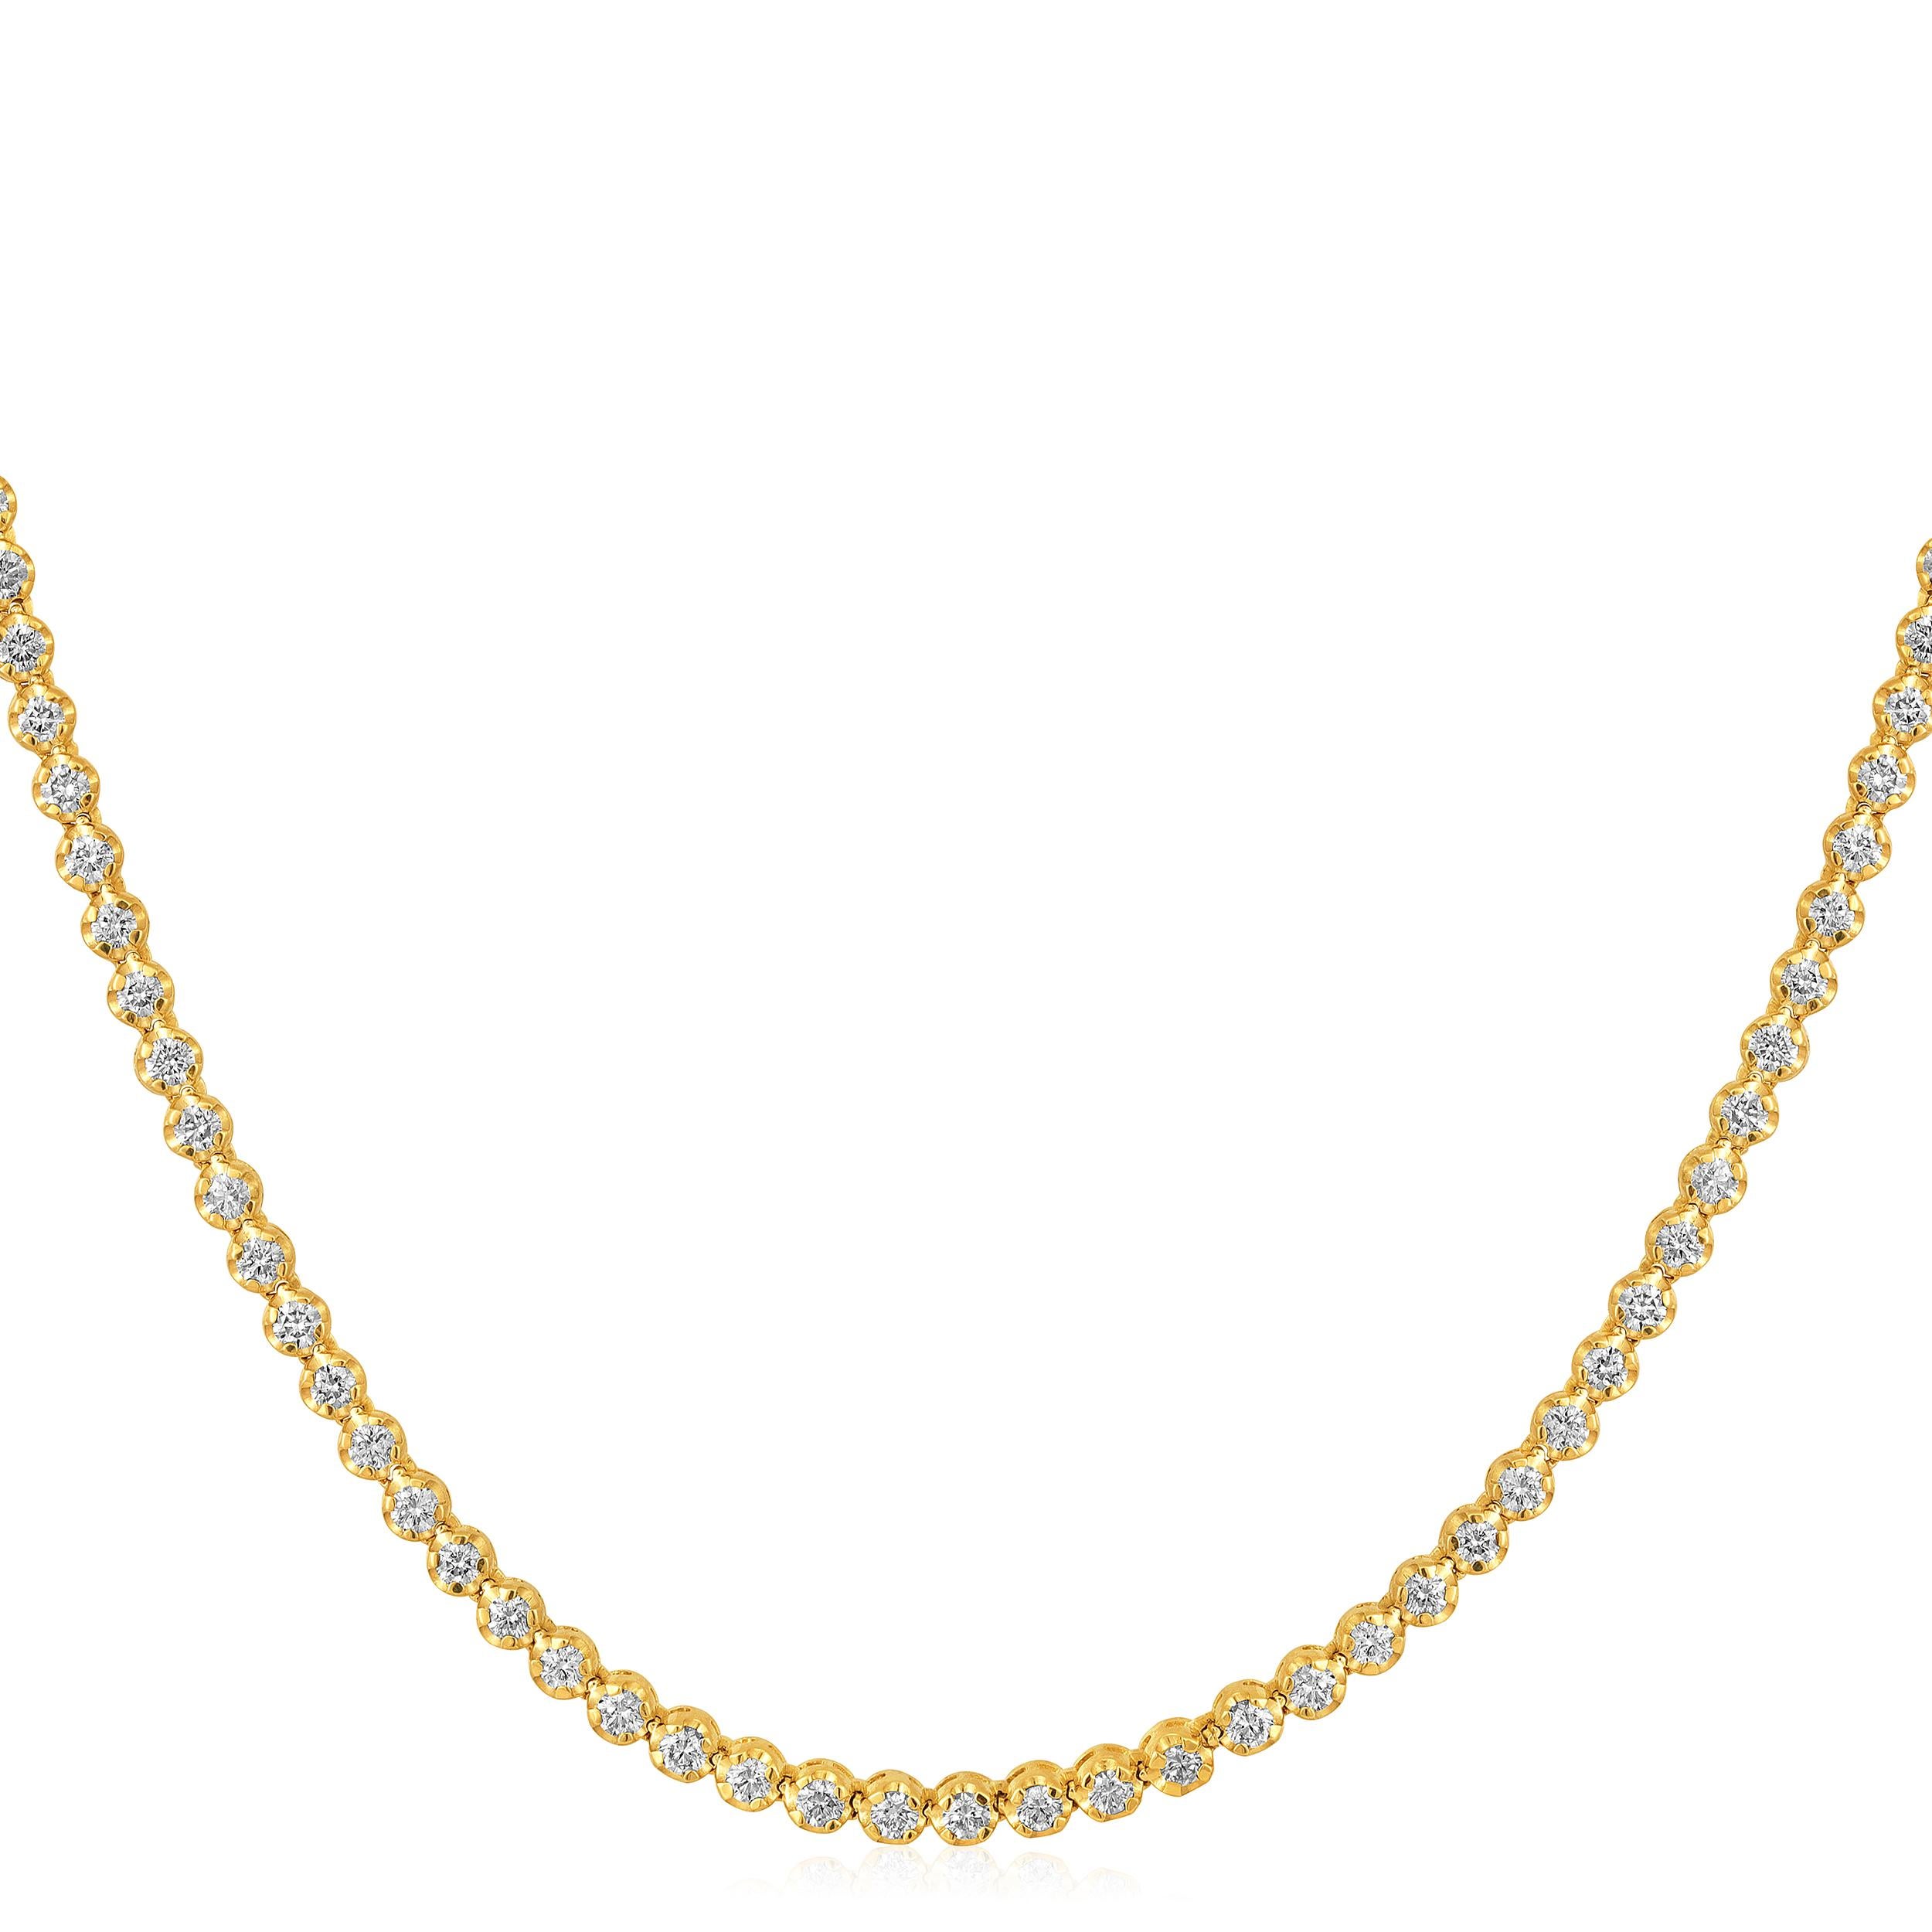 Crafted in 14.44 grams of 14K Yellow Gold, the necklace contains 109 stones of Round Natural Diamonds with a total of 3.97 carat in F-G color and SI clarity. The necklace length is 18 inches.

CONTEMPORARY AND TIMELESS ESSENCE: Crafted in